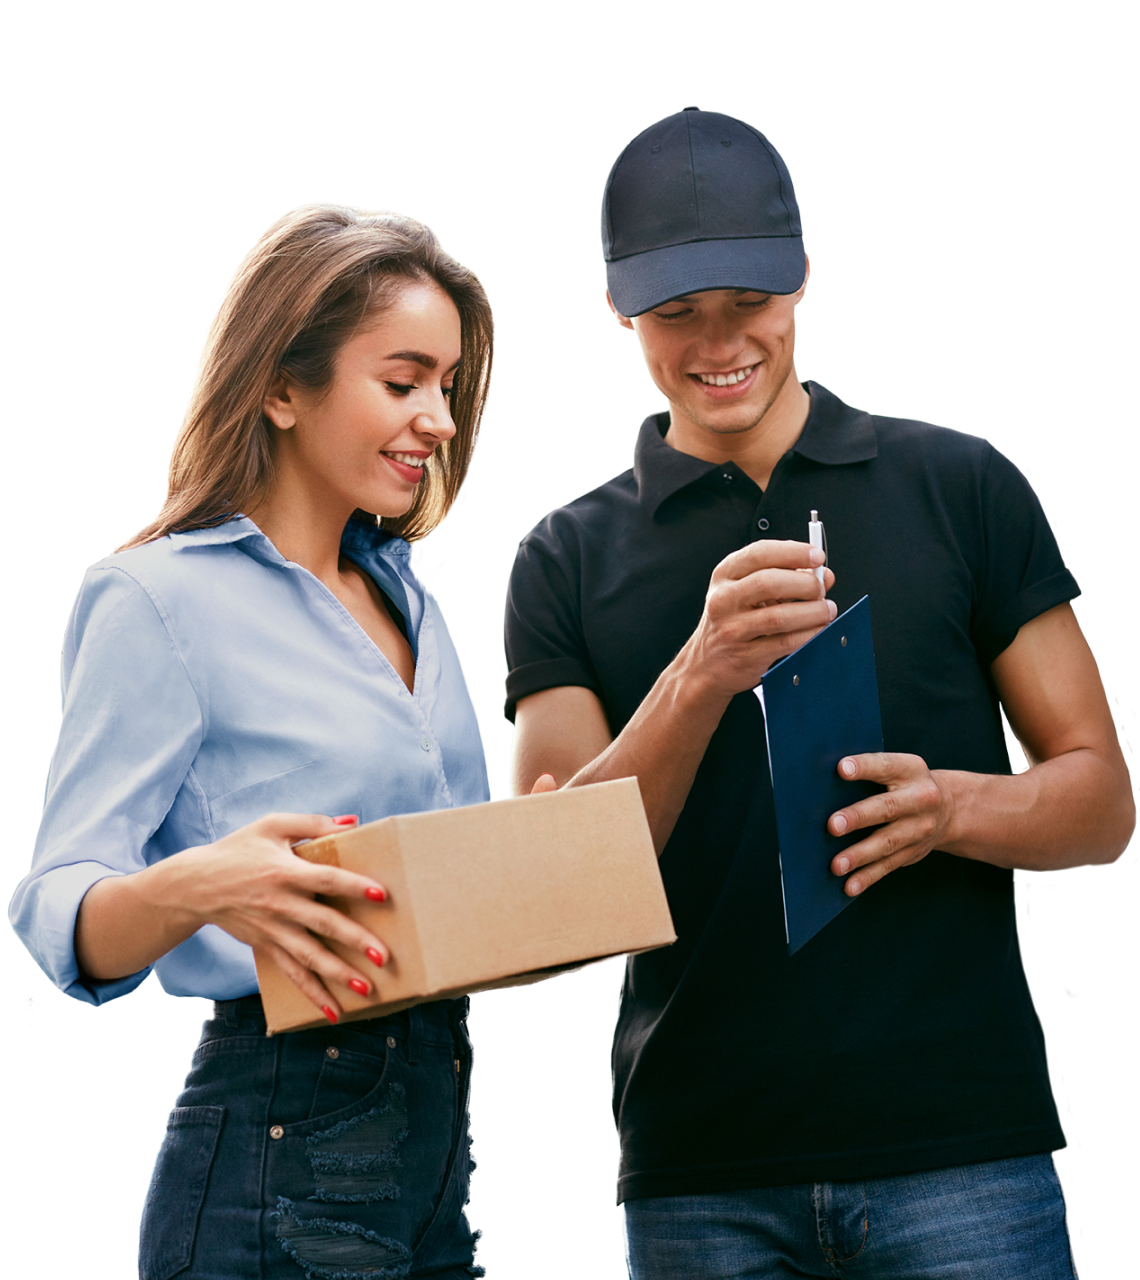 Fastest Cargo Service in India - Courier with box - borzo delivery